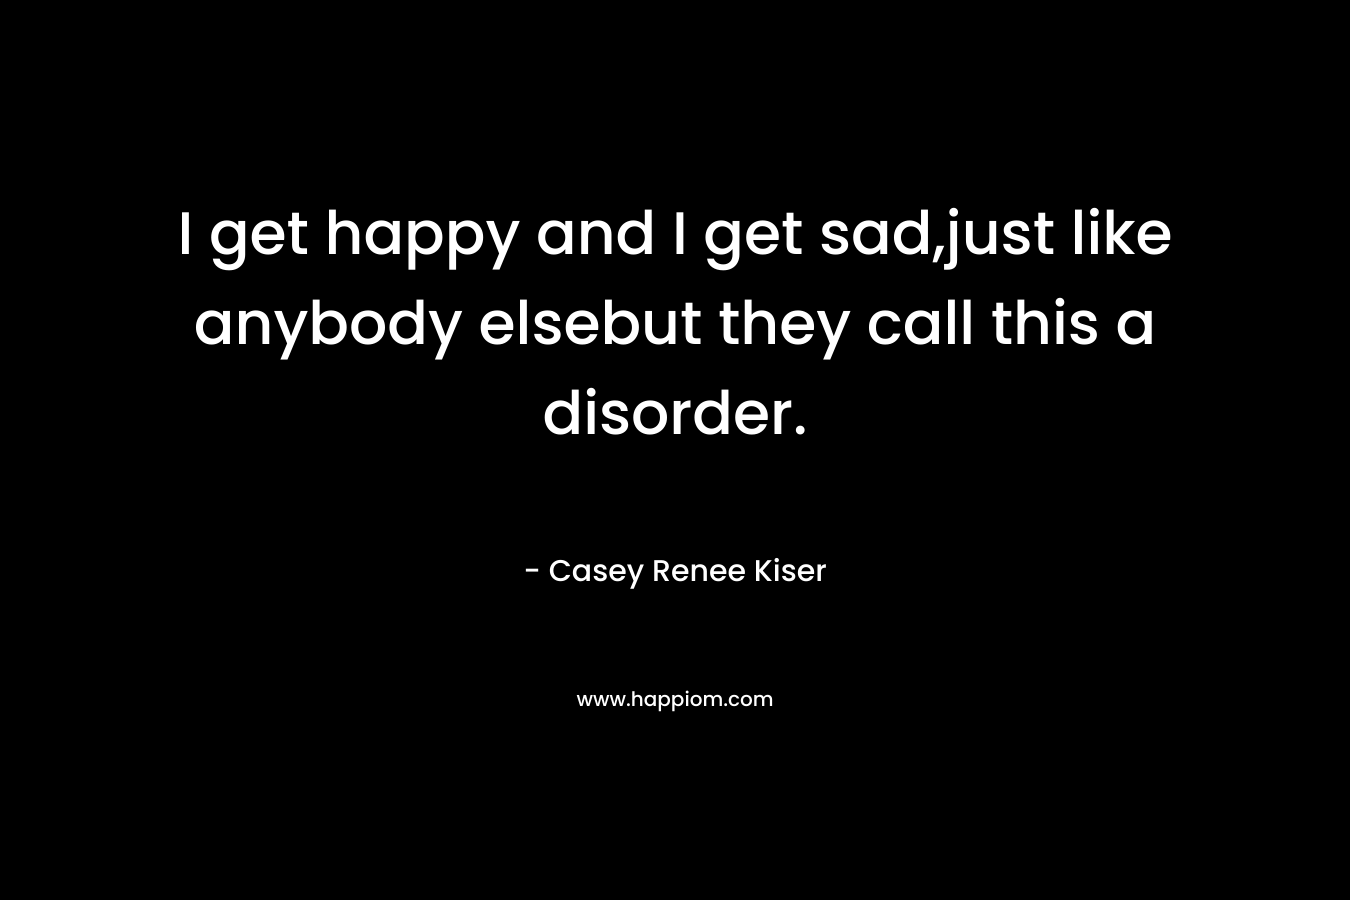 I get happy and I get sad,just like anybody elsebut they call this a disorder.